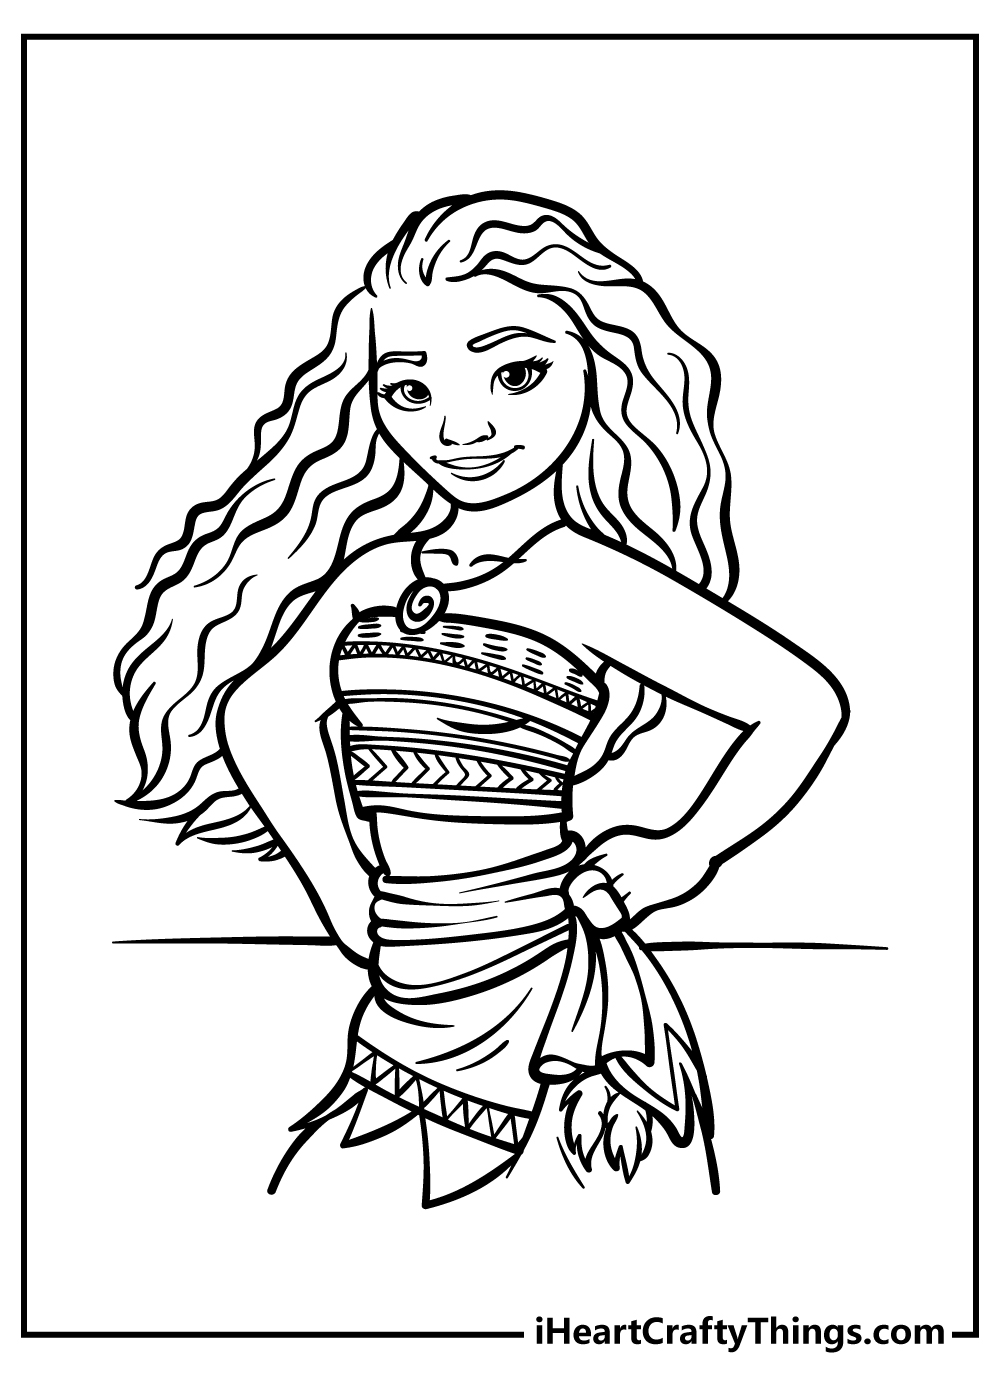 Printable Moana Coloring Pages (Updated )